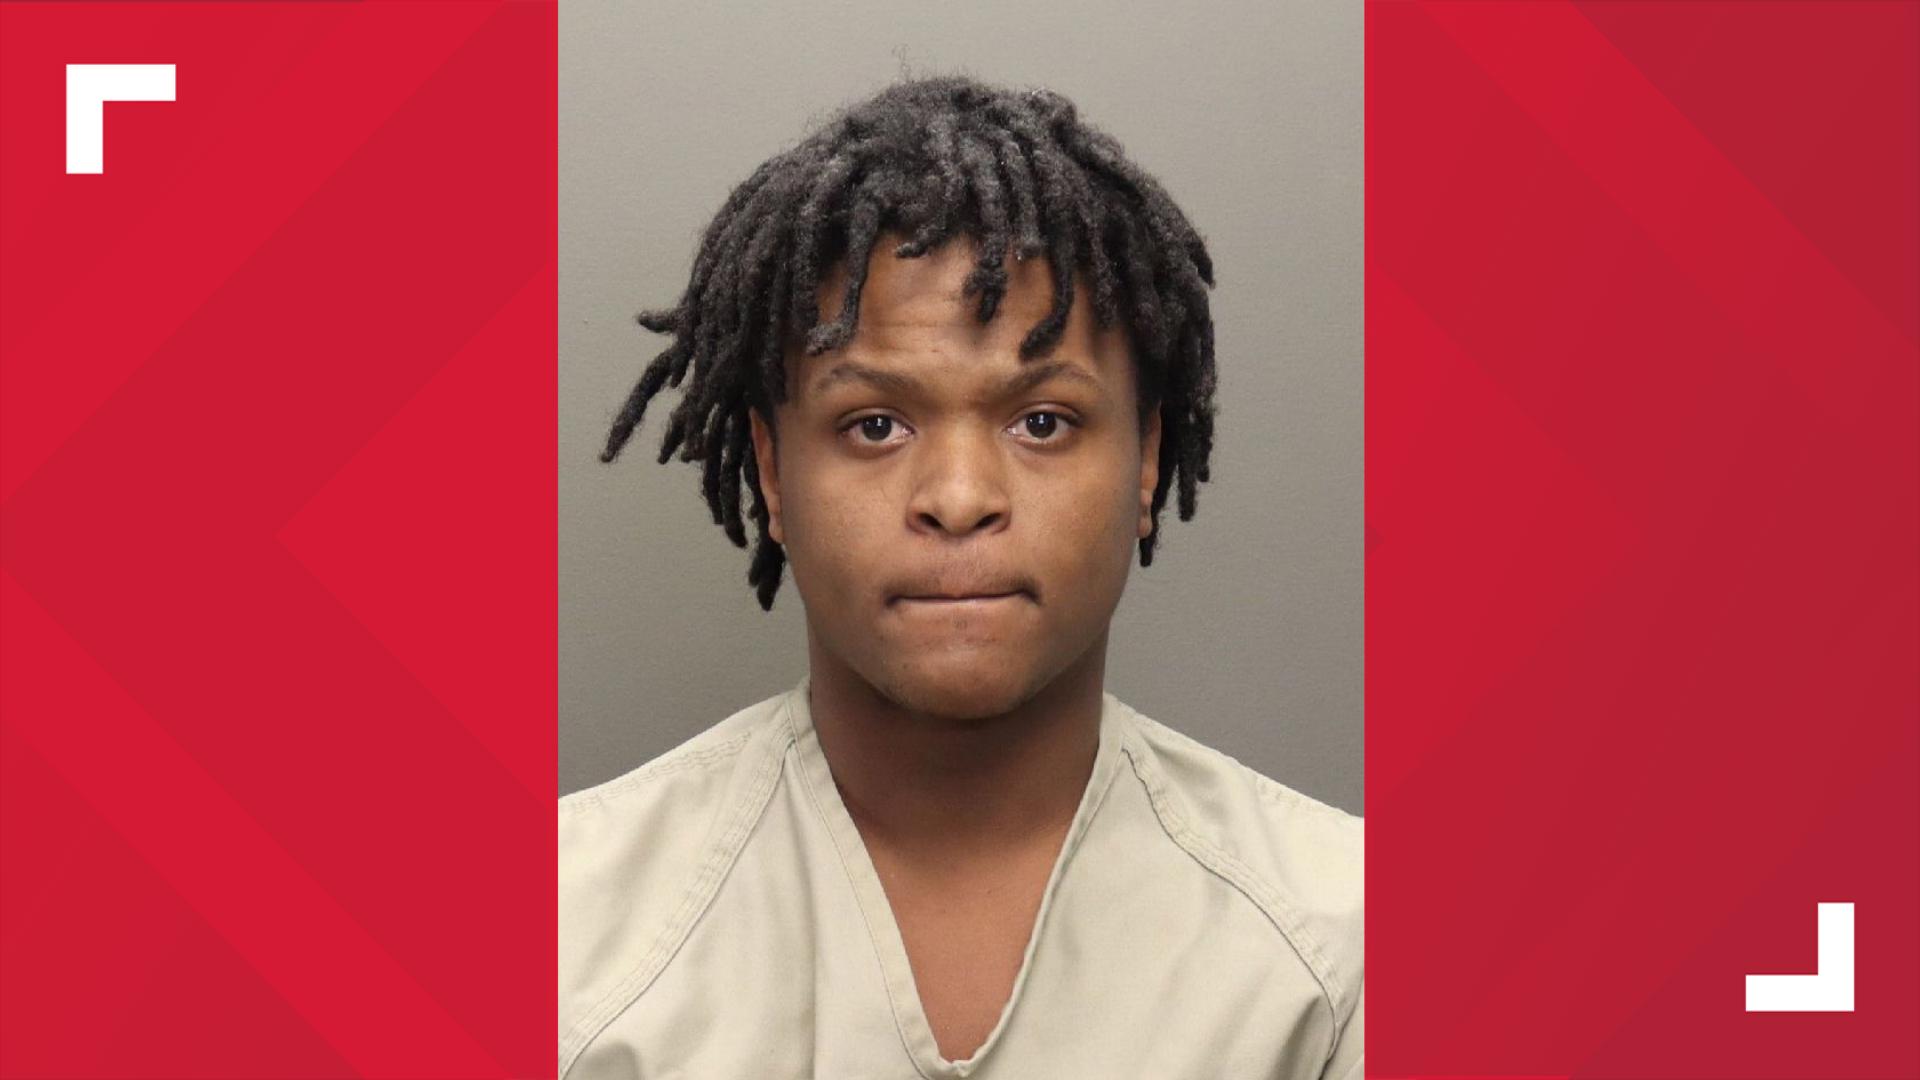 Police issued a warrant for a 19-year-old suspect accused of shooting and killing a man after a fight broke out at a Waffle House near Ohio State.